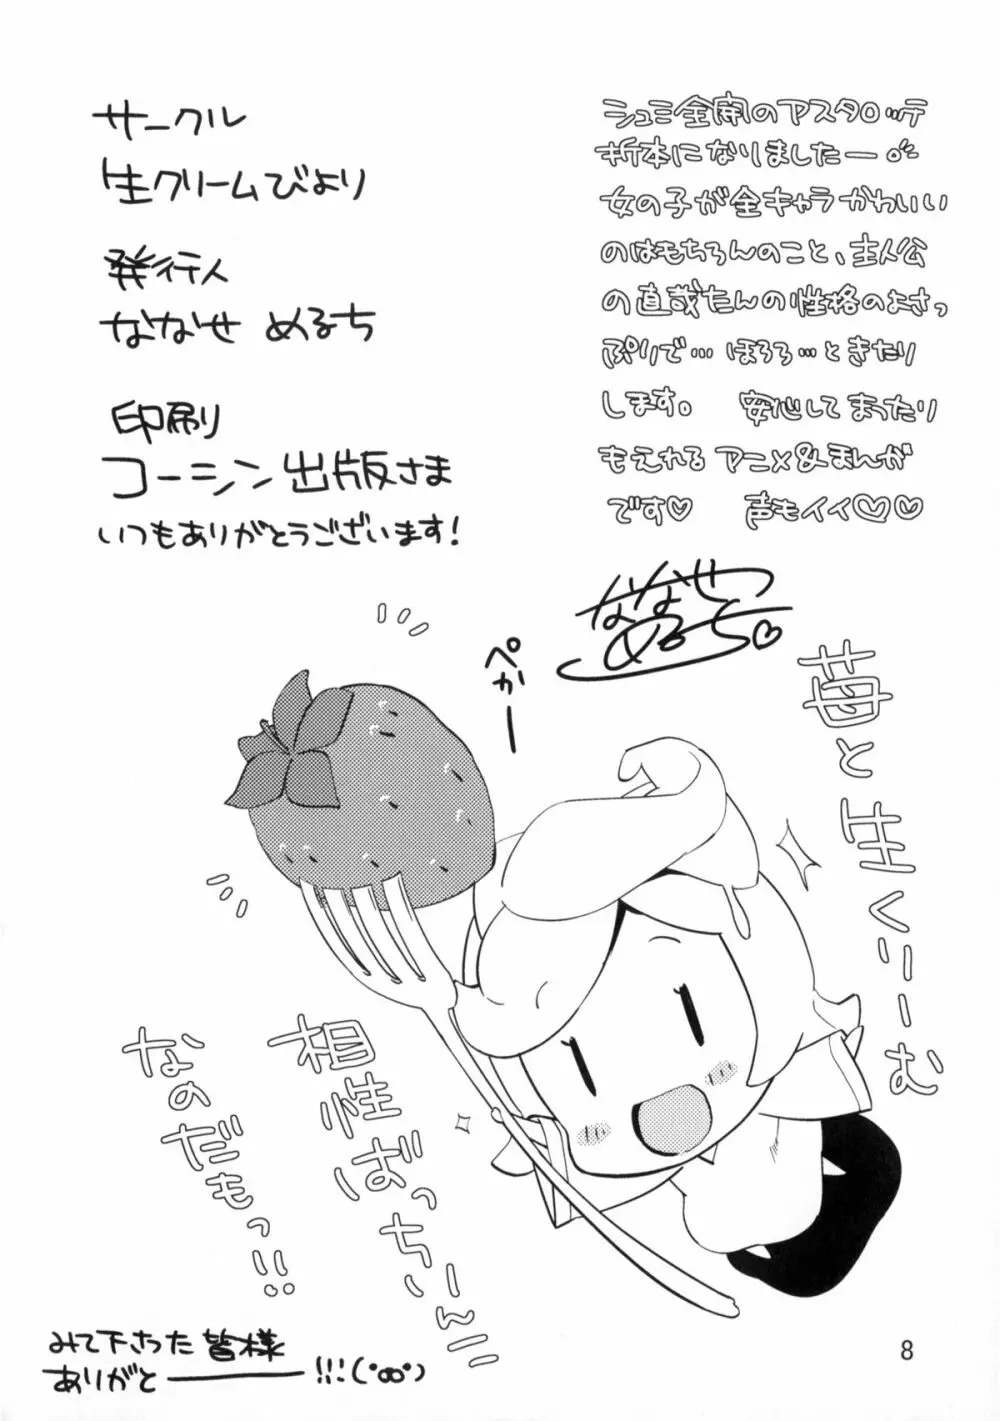 Whip note vol.5 Page.6